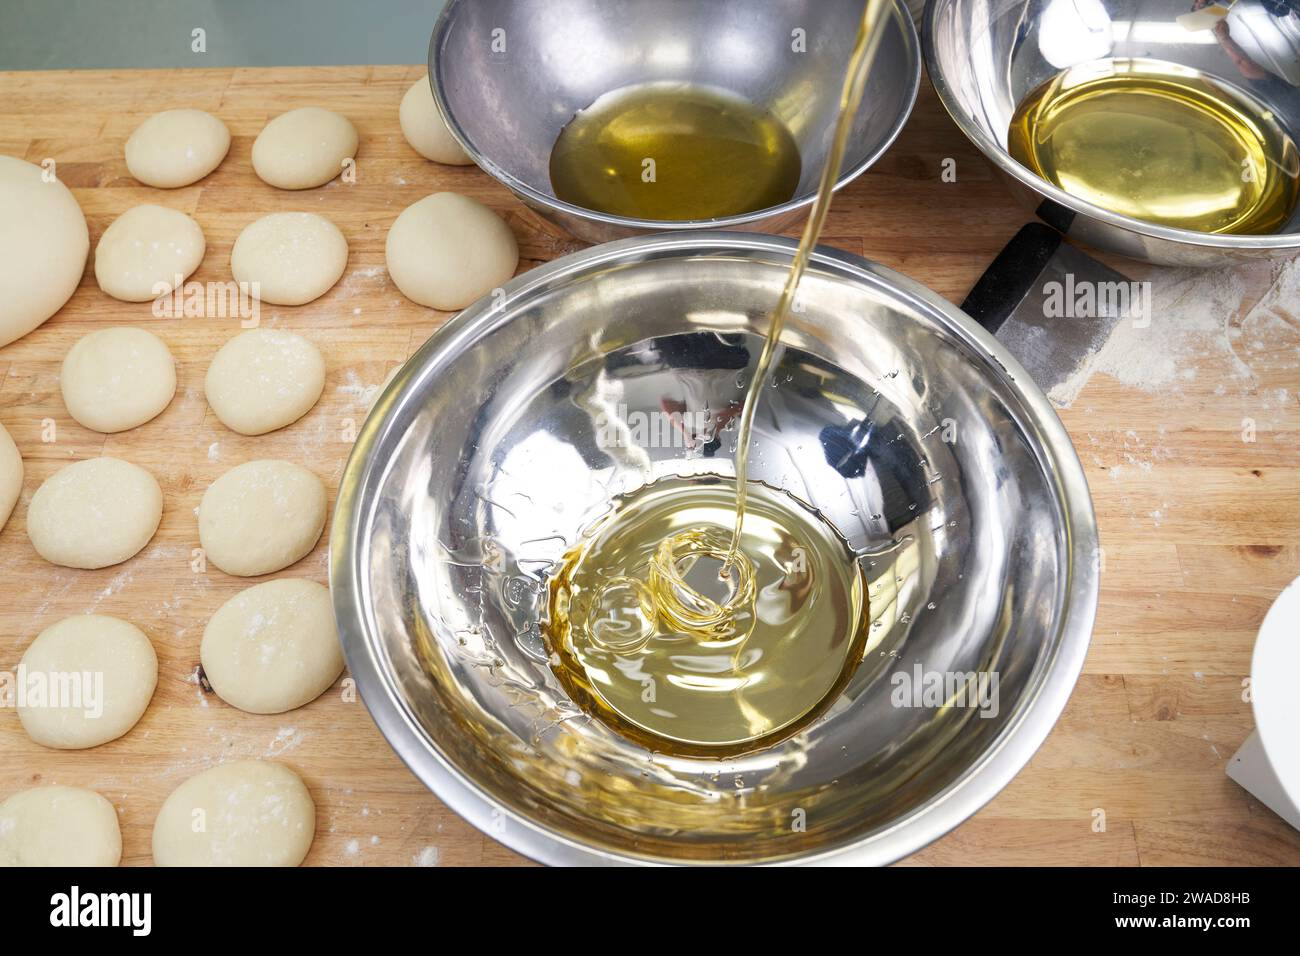 Olive oil pouring into bowl during bread baking Stock Photo